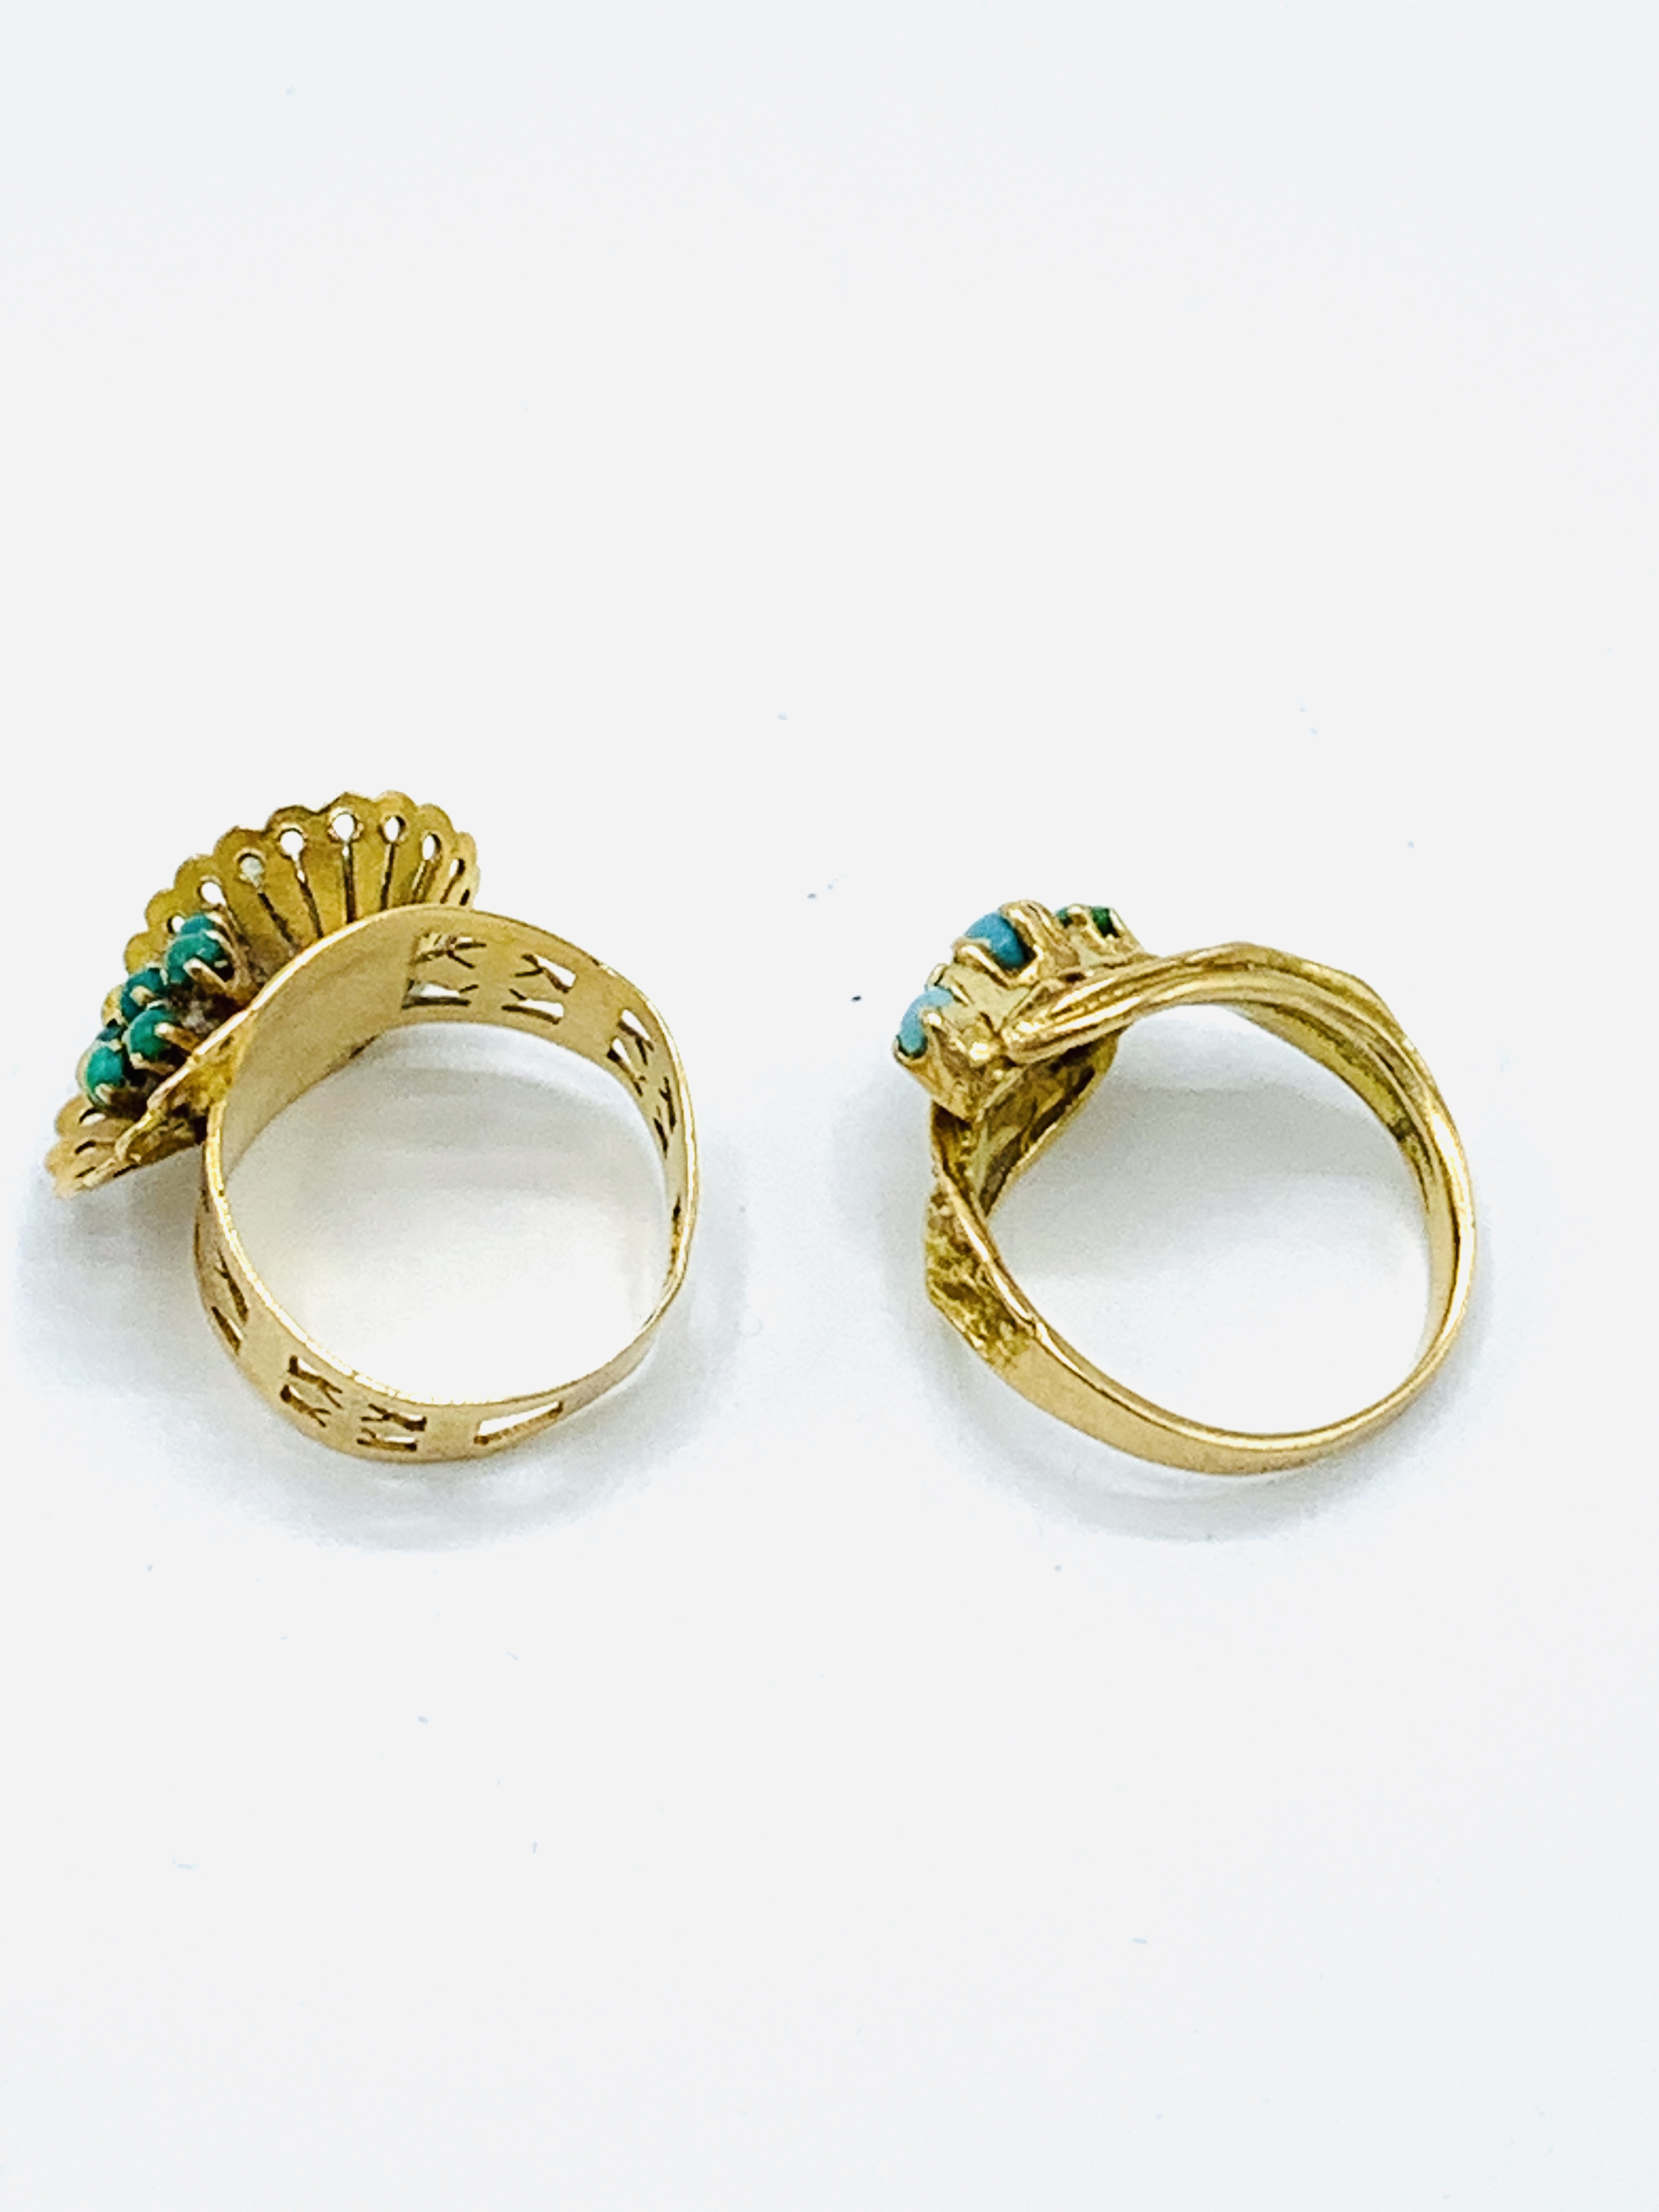 Two 18ct gold and turquoise rings - Image 3 of 4